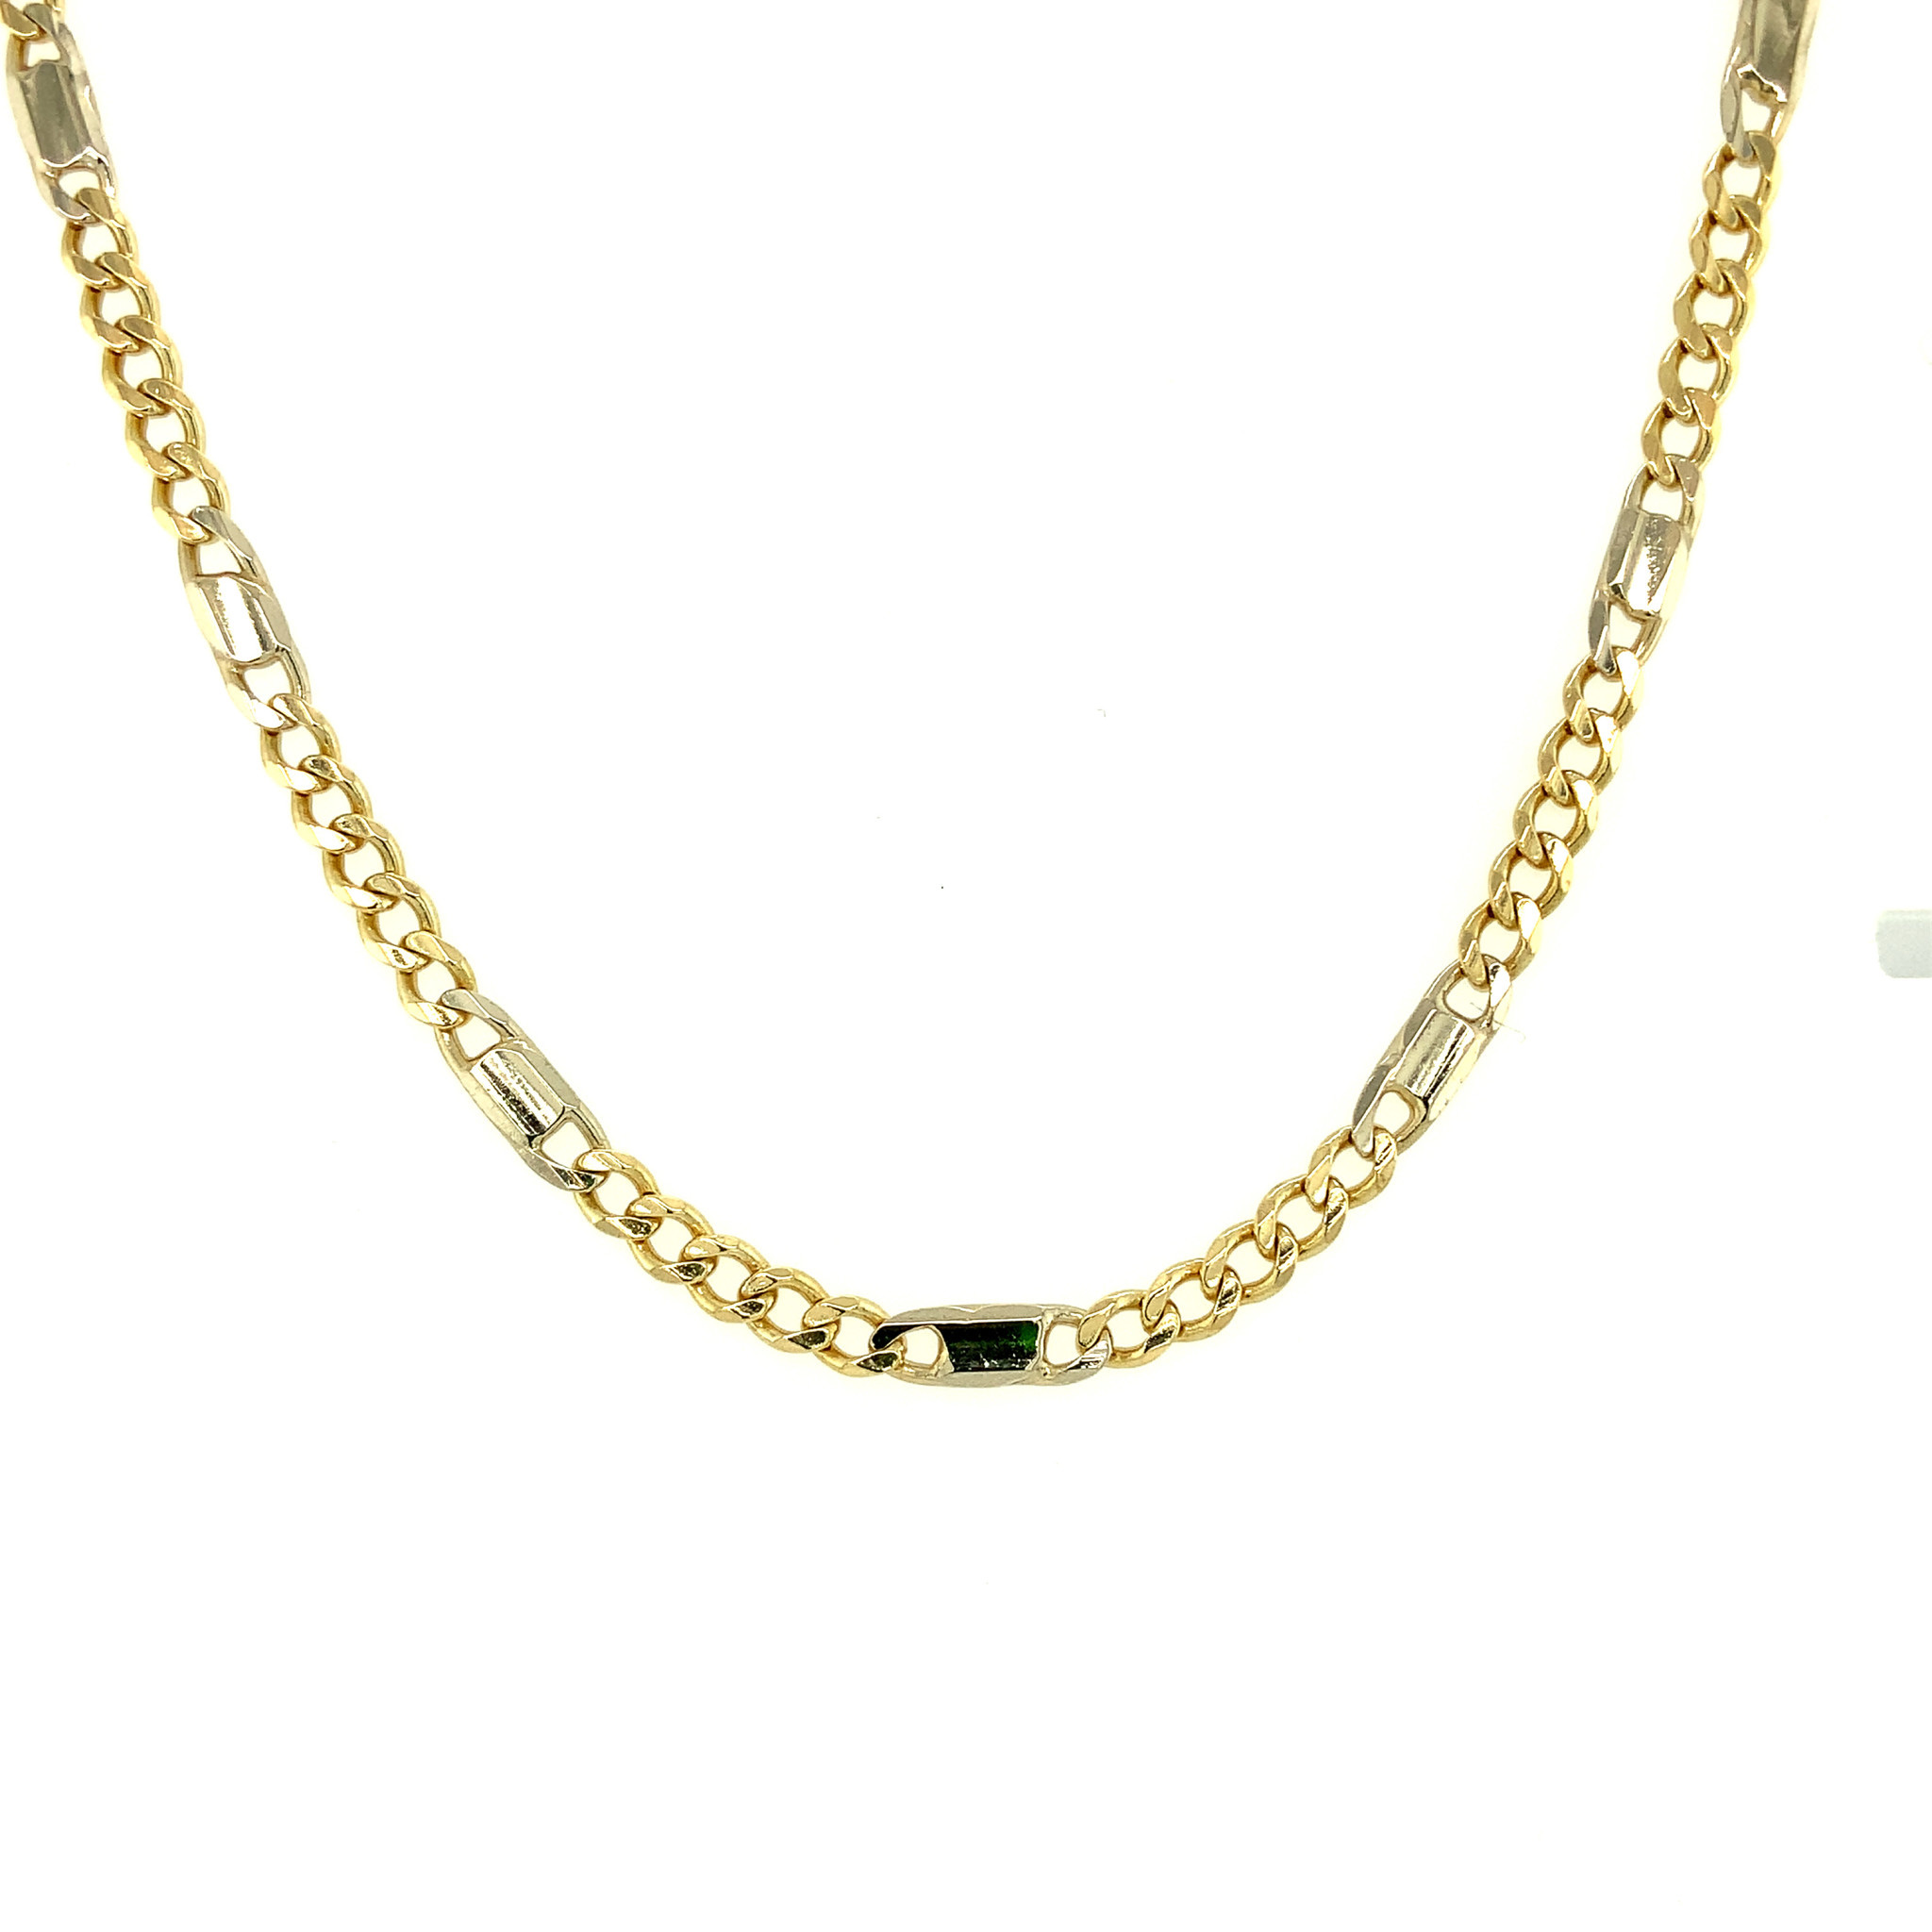 50051 18K YELLOW GOLD CURB AND TIGER EYE LINK CHAIN 24''